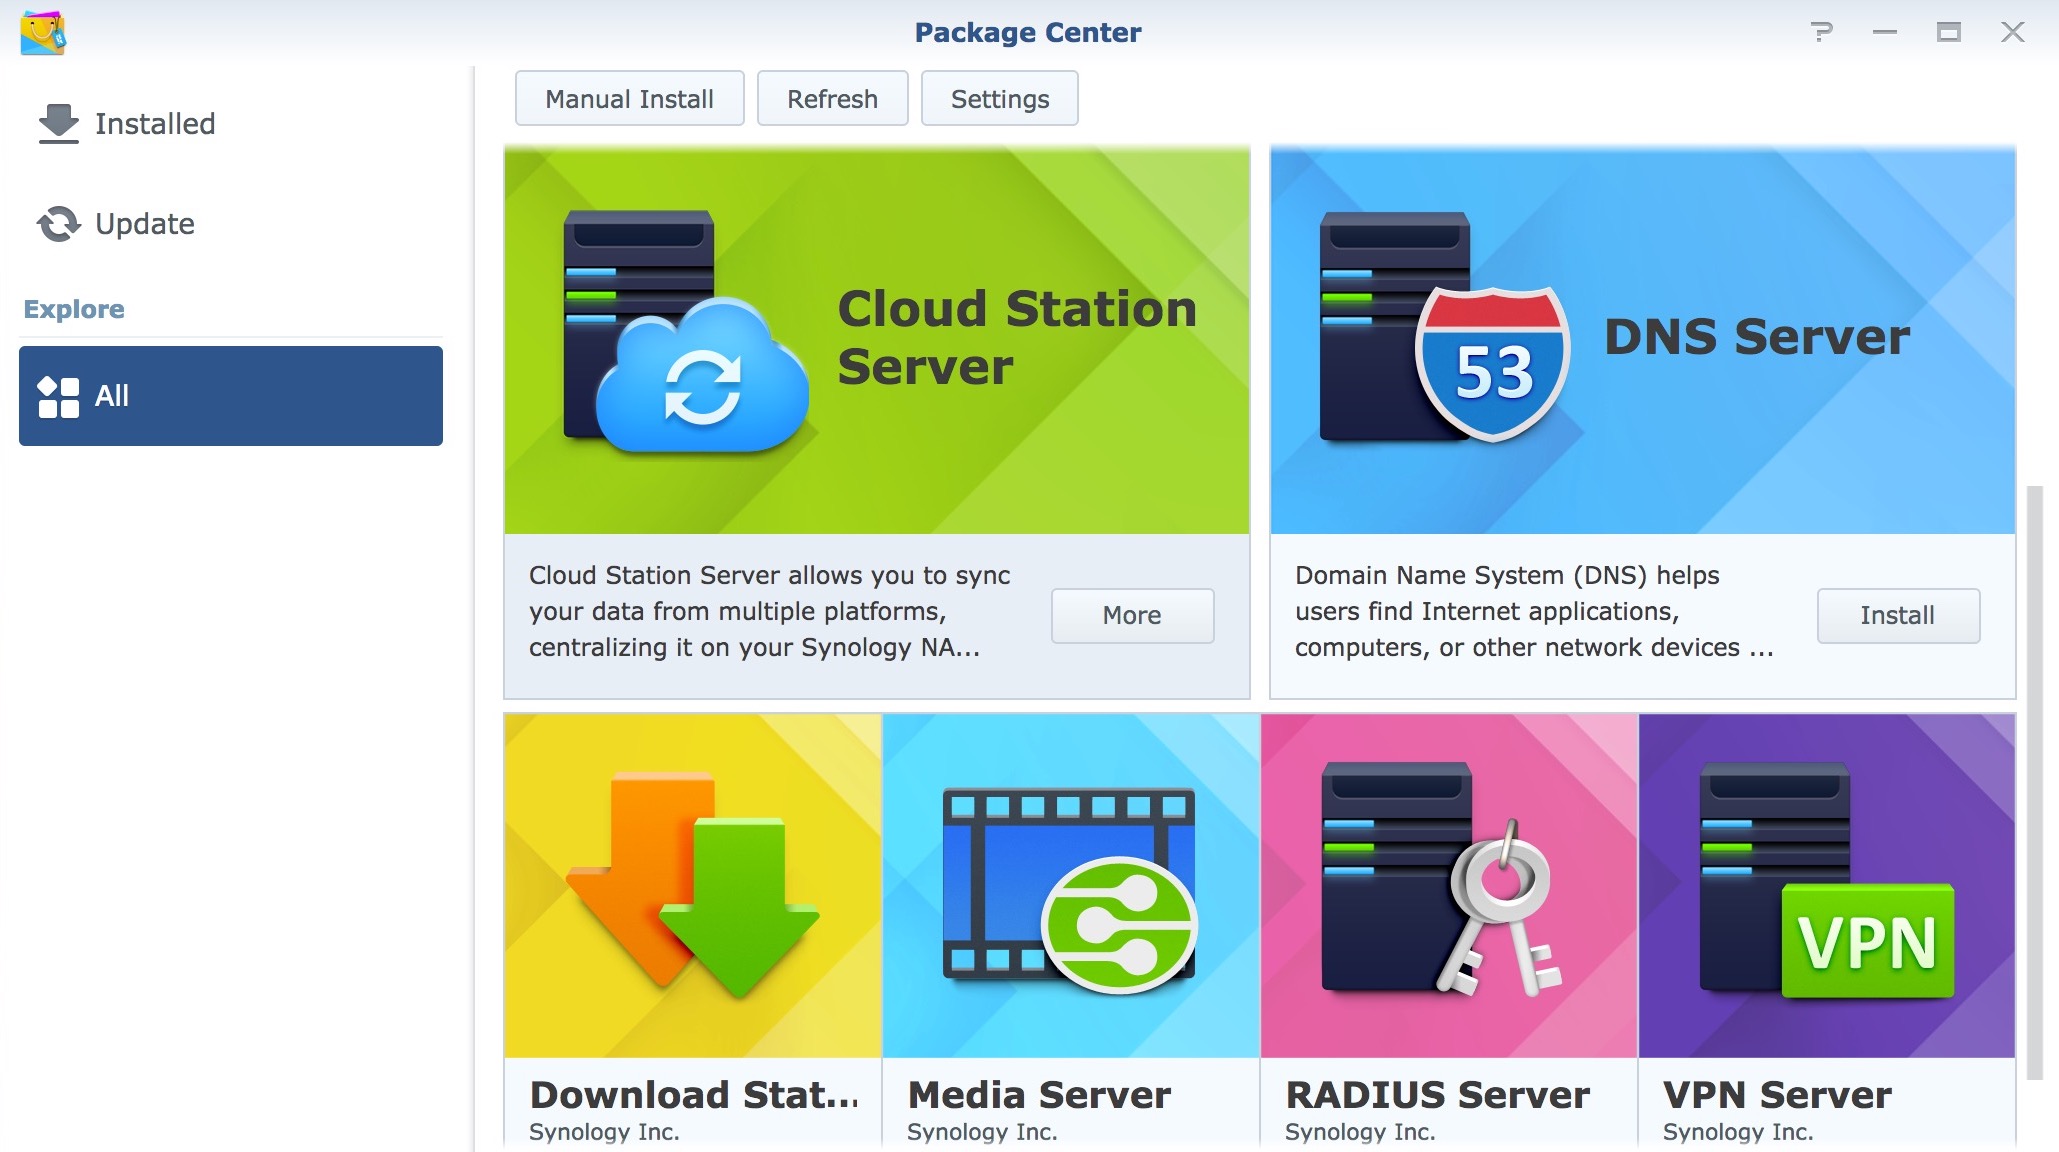 synology-srm-package-center